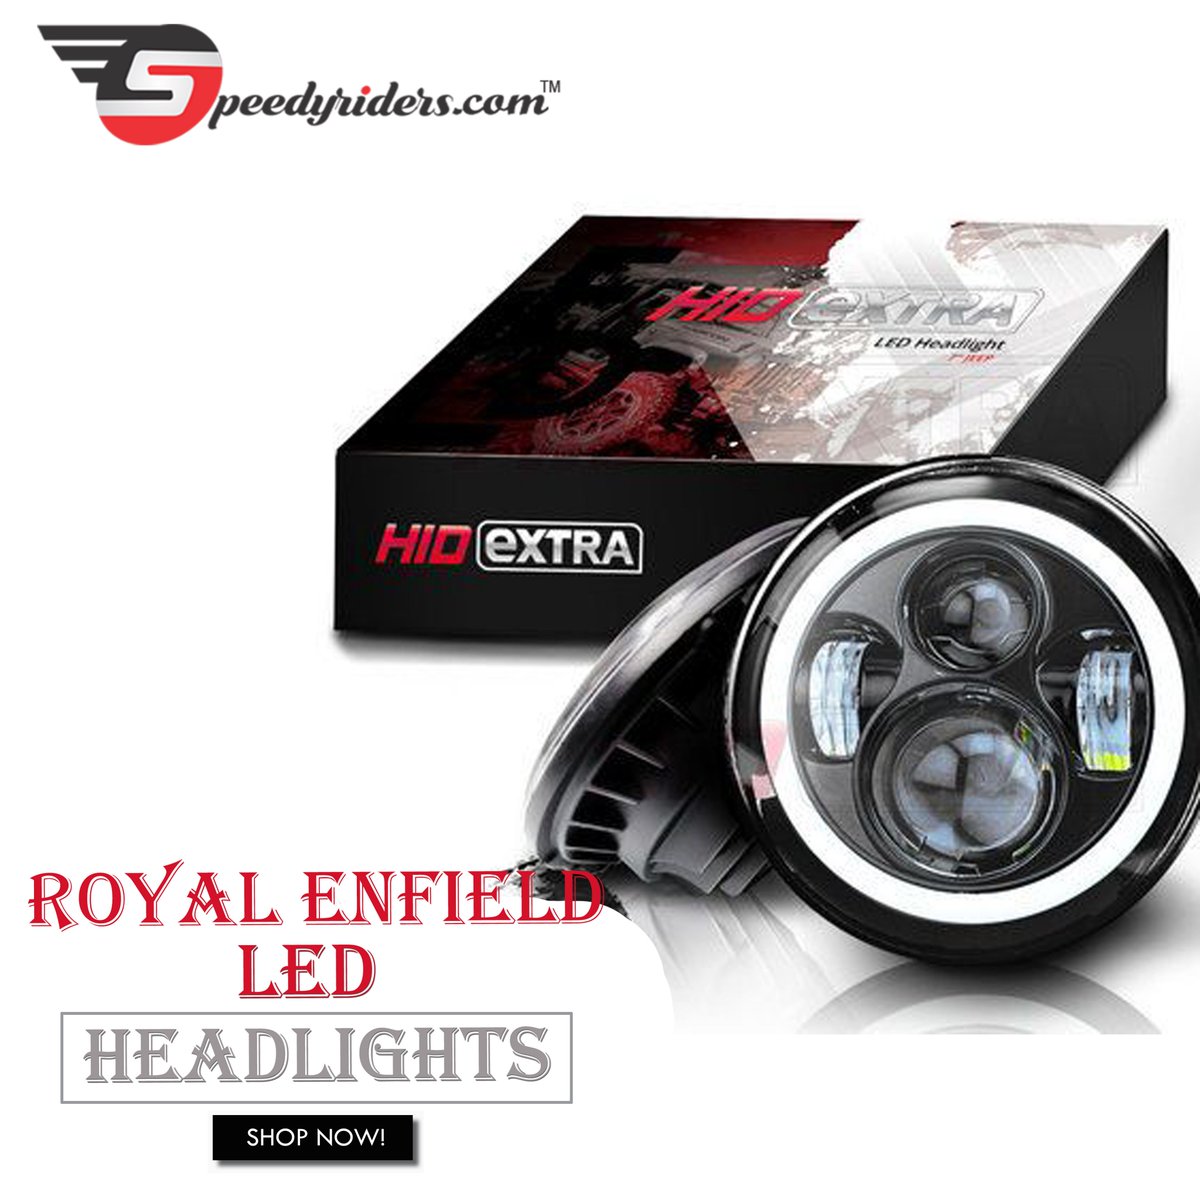 Speedy Riders Real Brand New Projector Headlight For Royal Enfield.
Shop Now-bit.ly/2vmfRj8
#Riding #BikeLagguards #Royalenfield #BikeAccessories #RoyalenfieldAccessories #BikeGloves #Gloves #RidingGoggles #Headlight